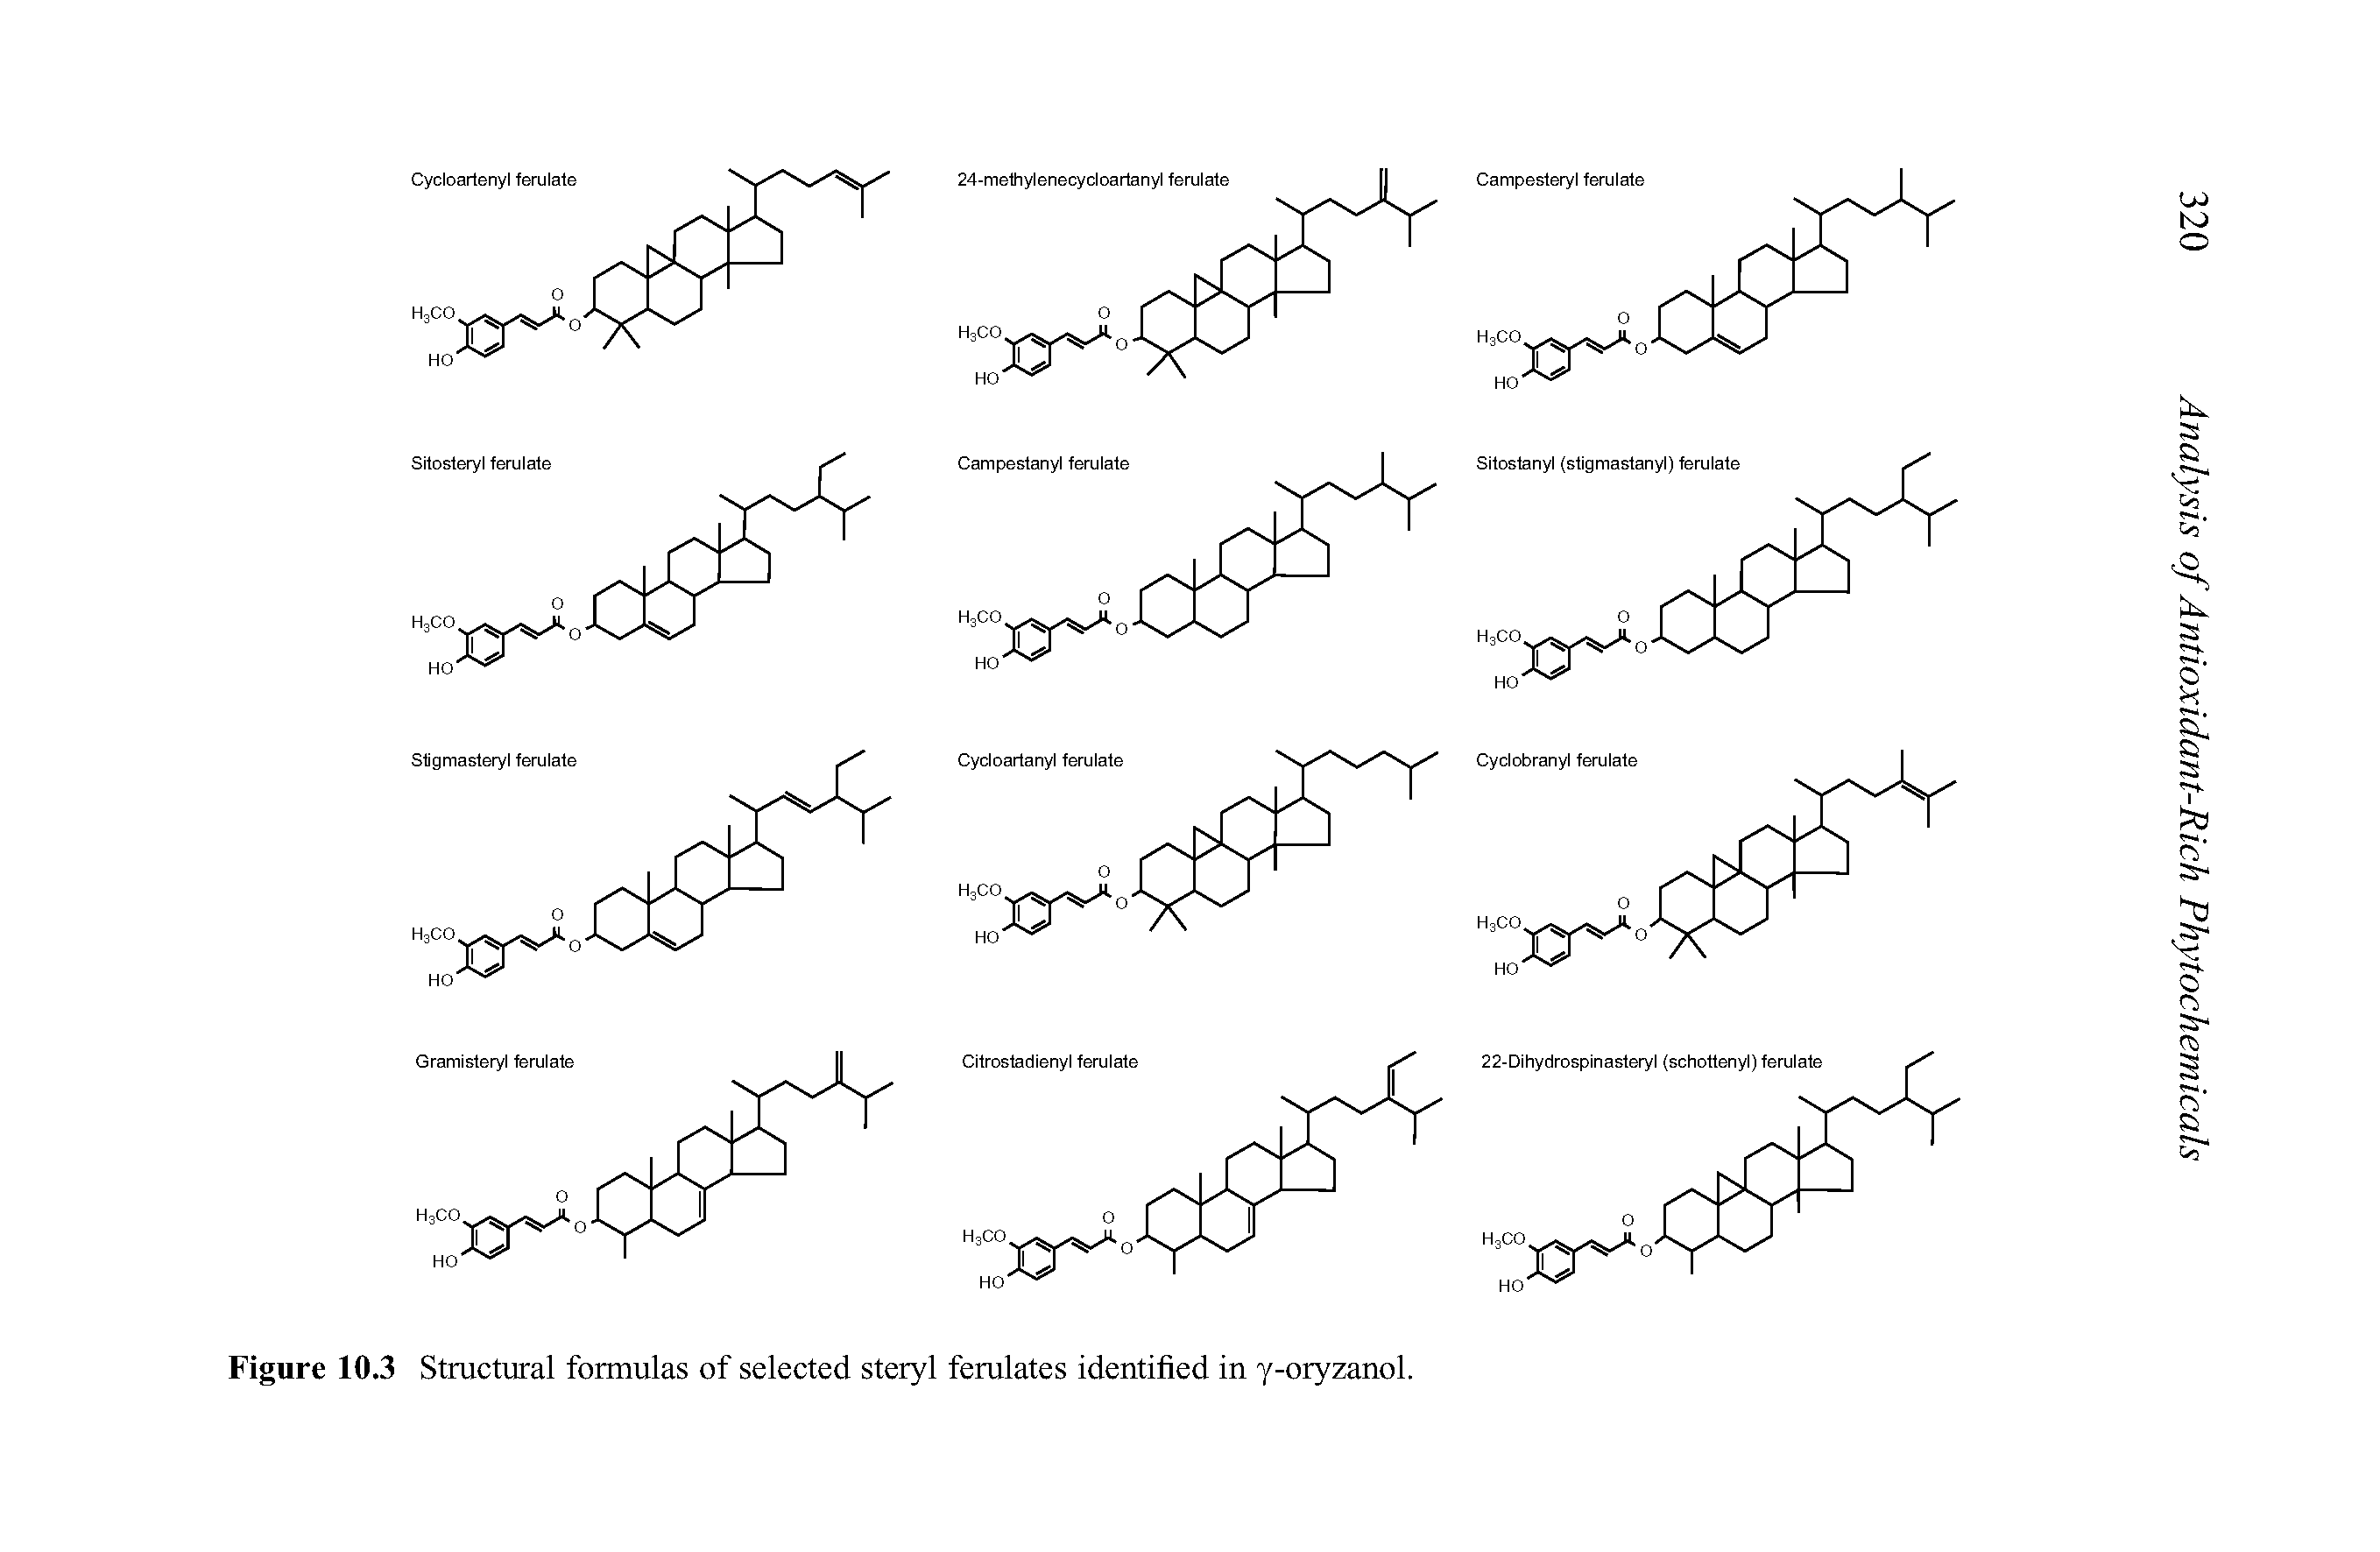 Figure 10.3 Structural formulas of selected steryl ferulates identified in y-oryzanol.